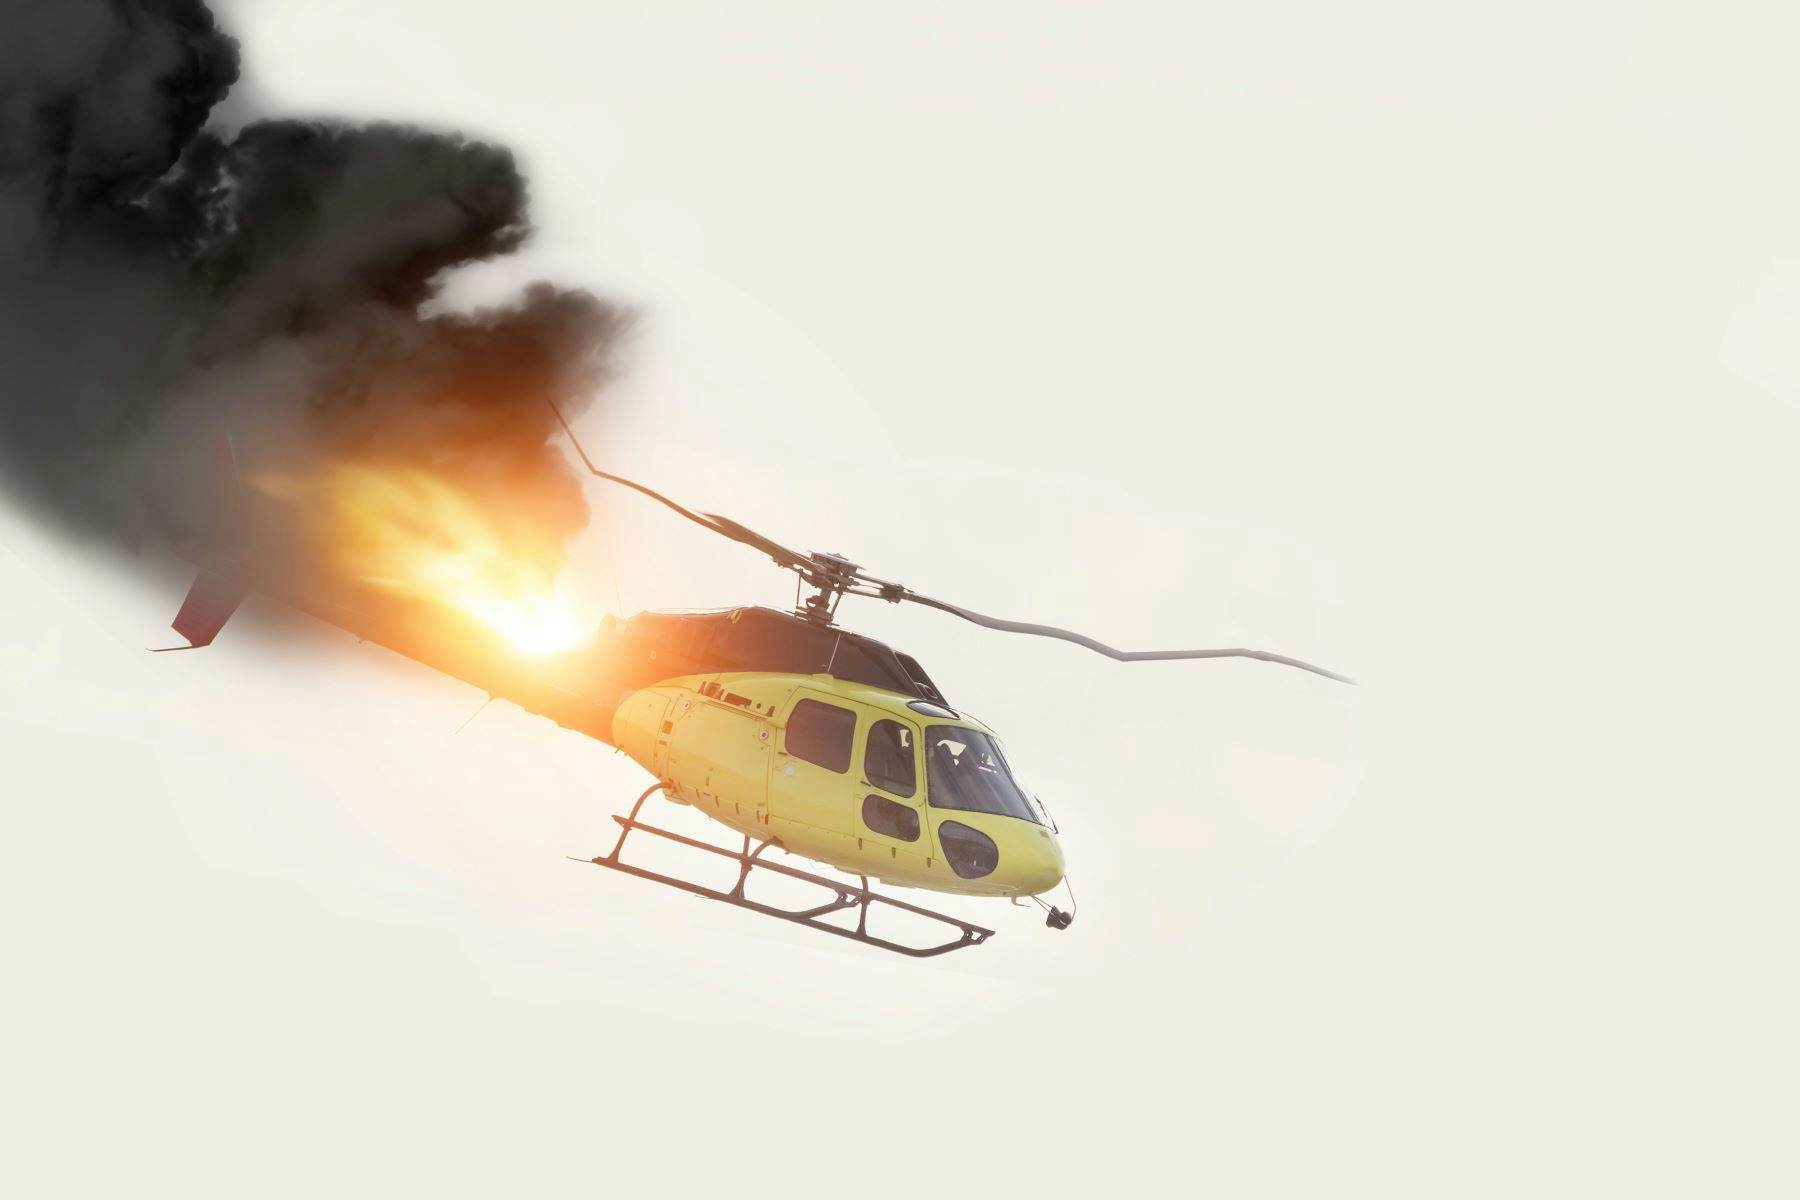 Falling helicopter in flames